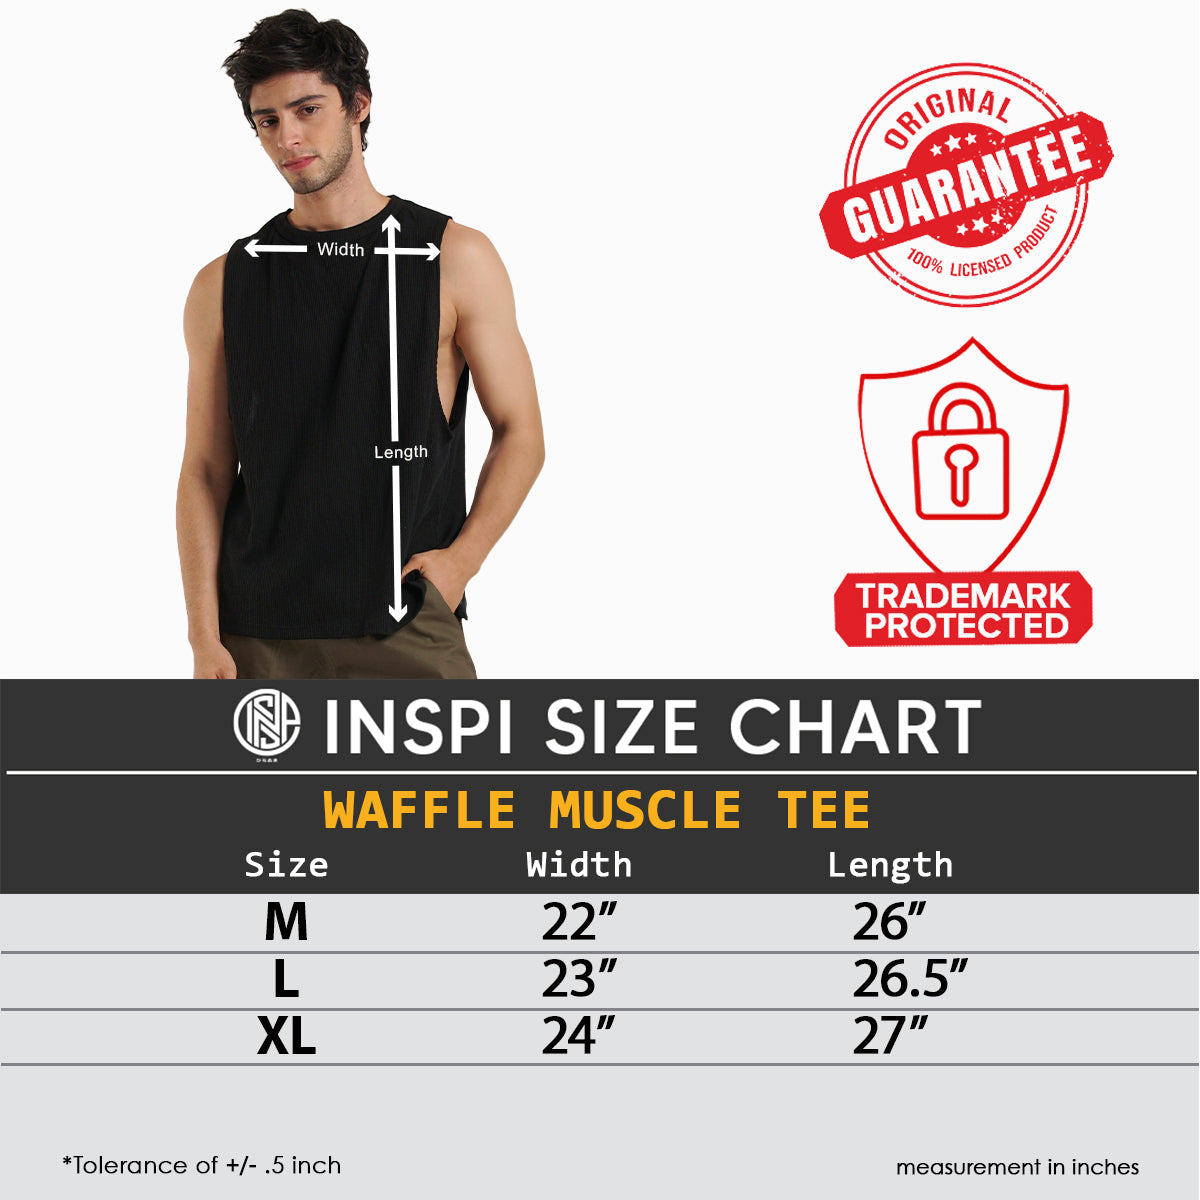 INSPI Waffle Muscle Tee Black Sando for Men Plain Sleeveless Tank Top Gym Workout Exercise Beach Outfit